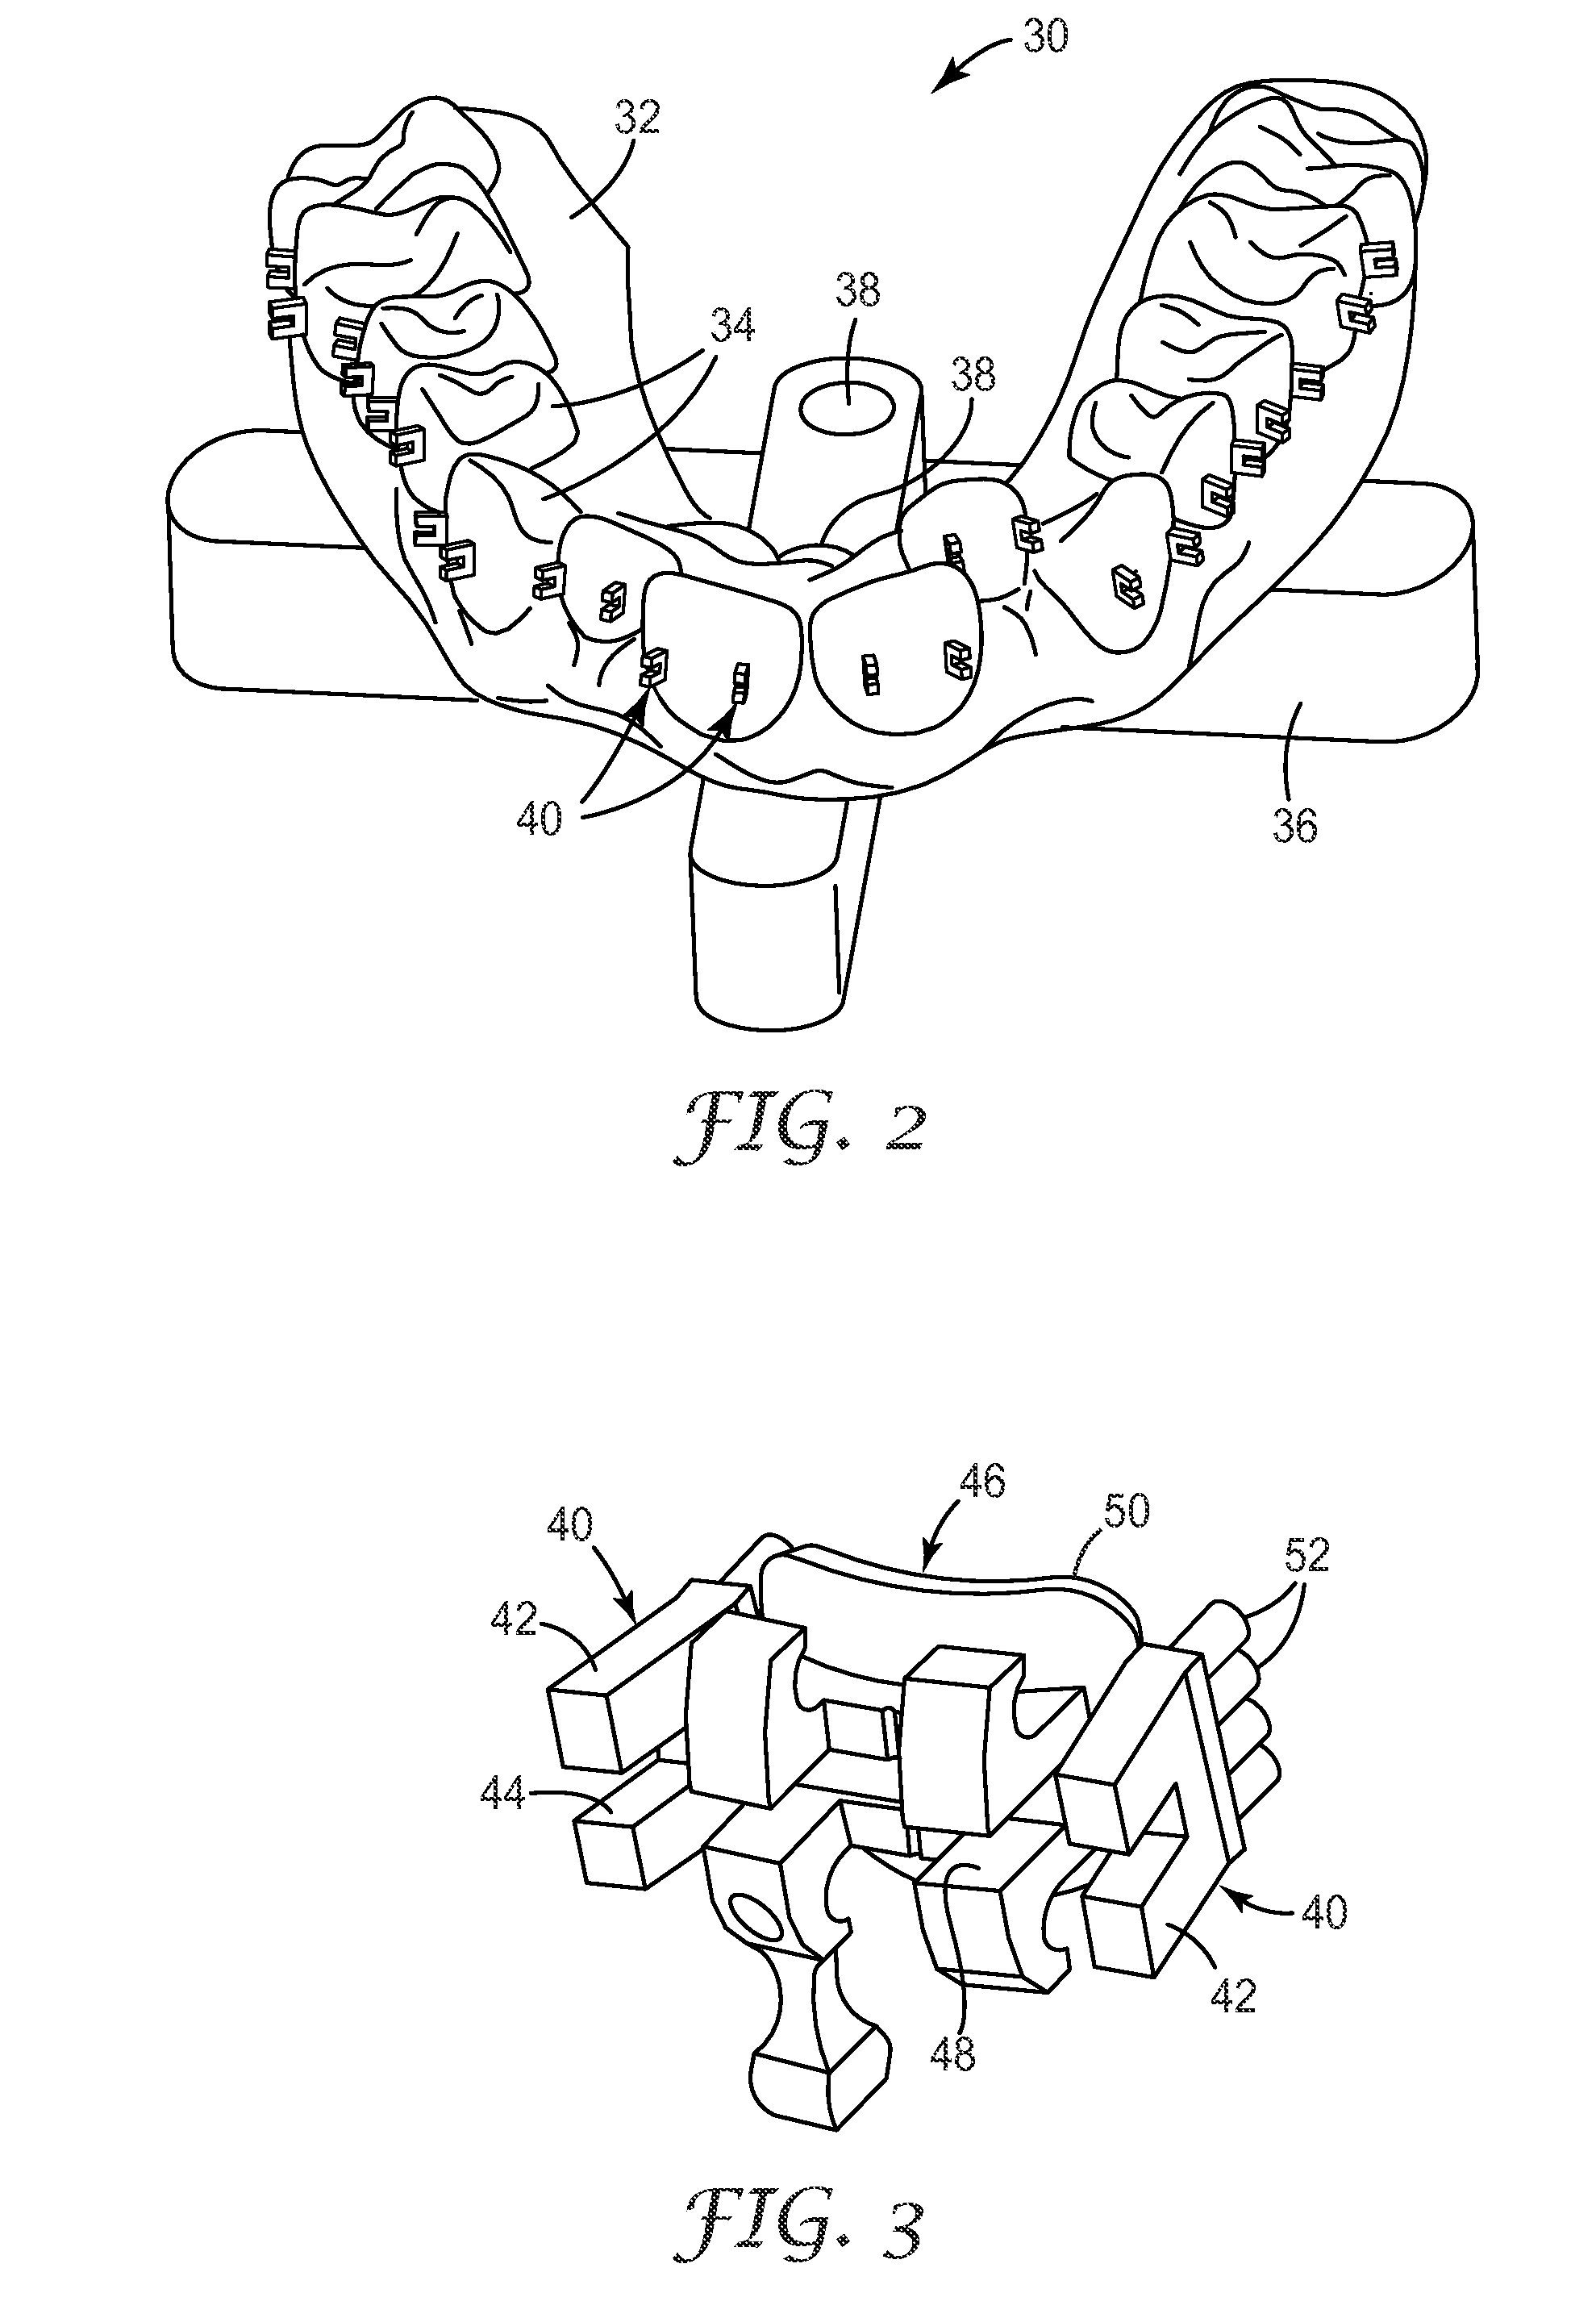 Indirect bonding trays for orthodontic treatment and methods for making the same